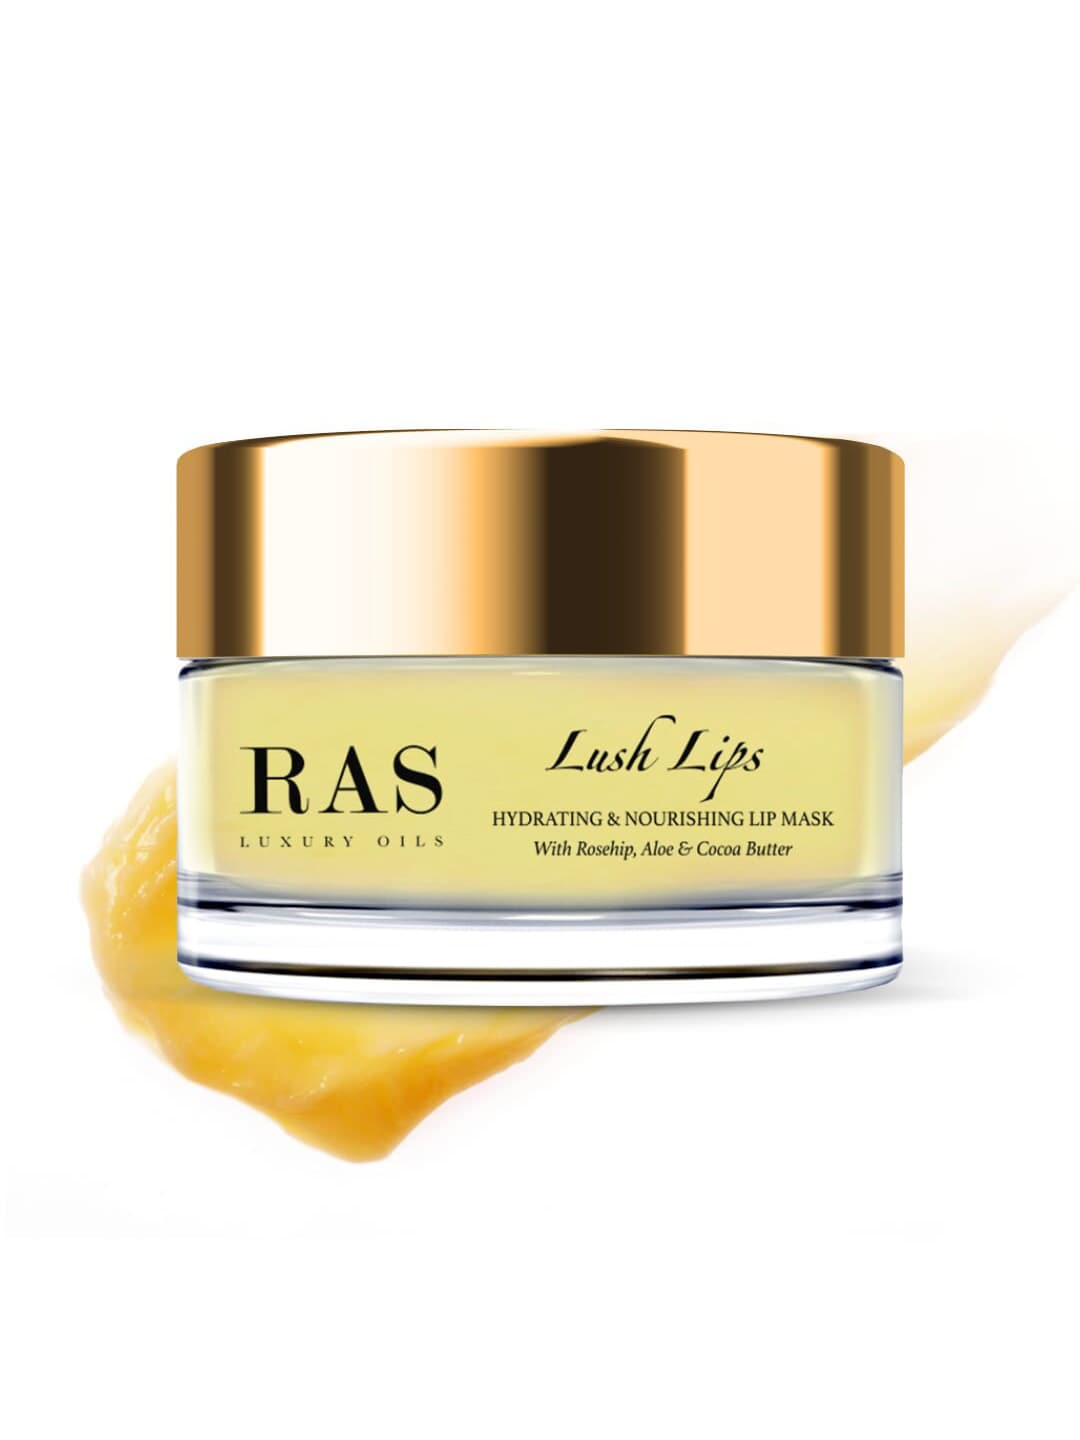 RAS LUXURY OILS Lush Lips Hydrating & Nourishing Lip Mask with Rosehip Extracts 8 g Price in India